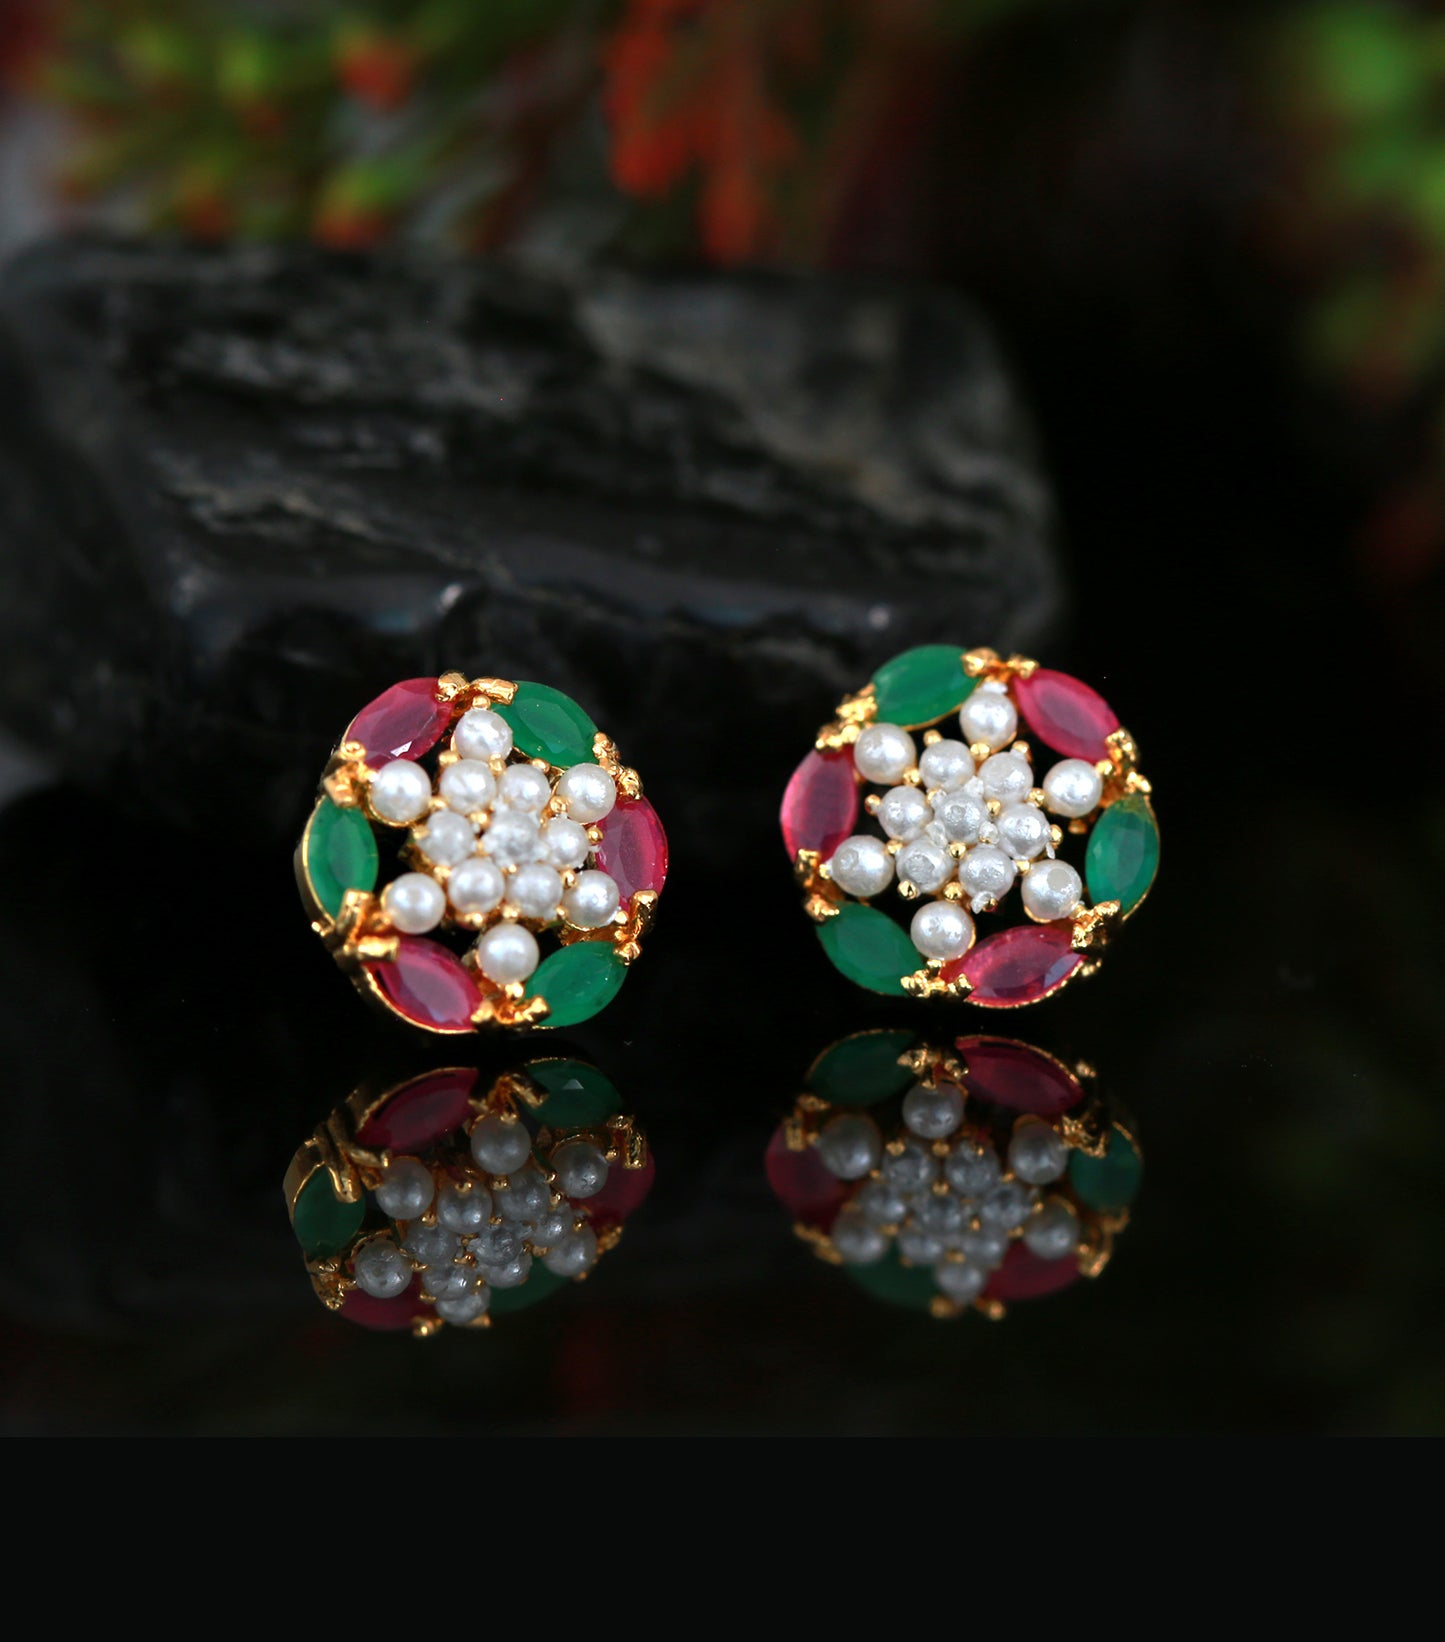 Pearl cluster cz Ruby Emerald Floral stud Earrings-top, Crystal Stud color Earrings, Perfect gift for her